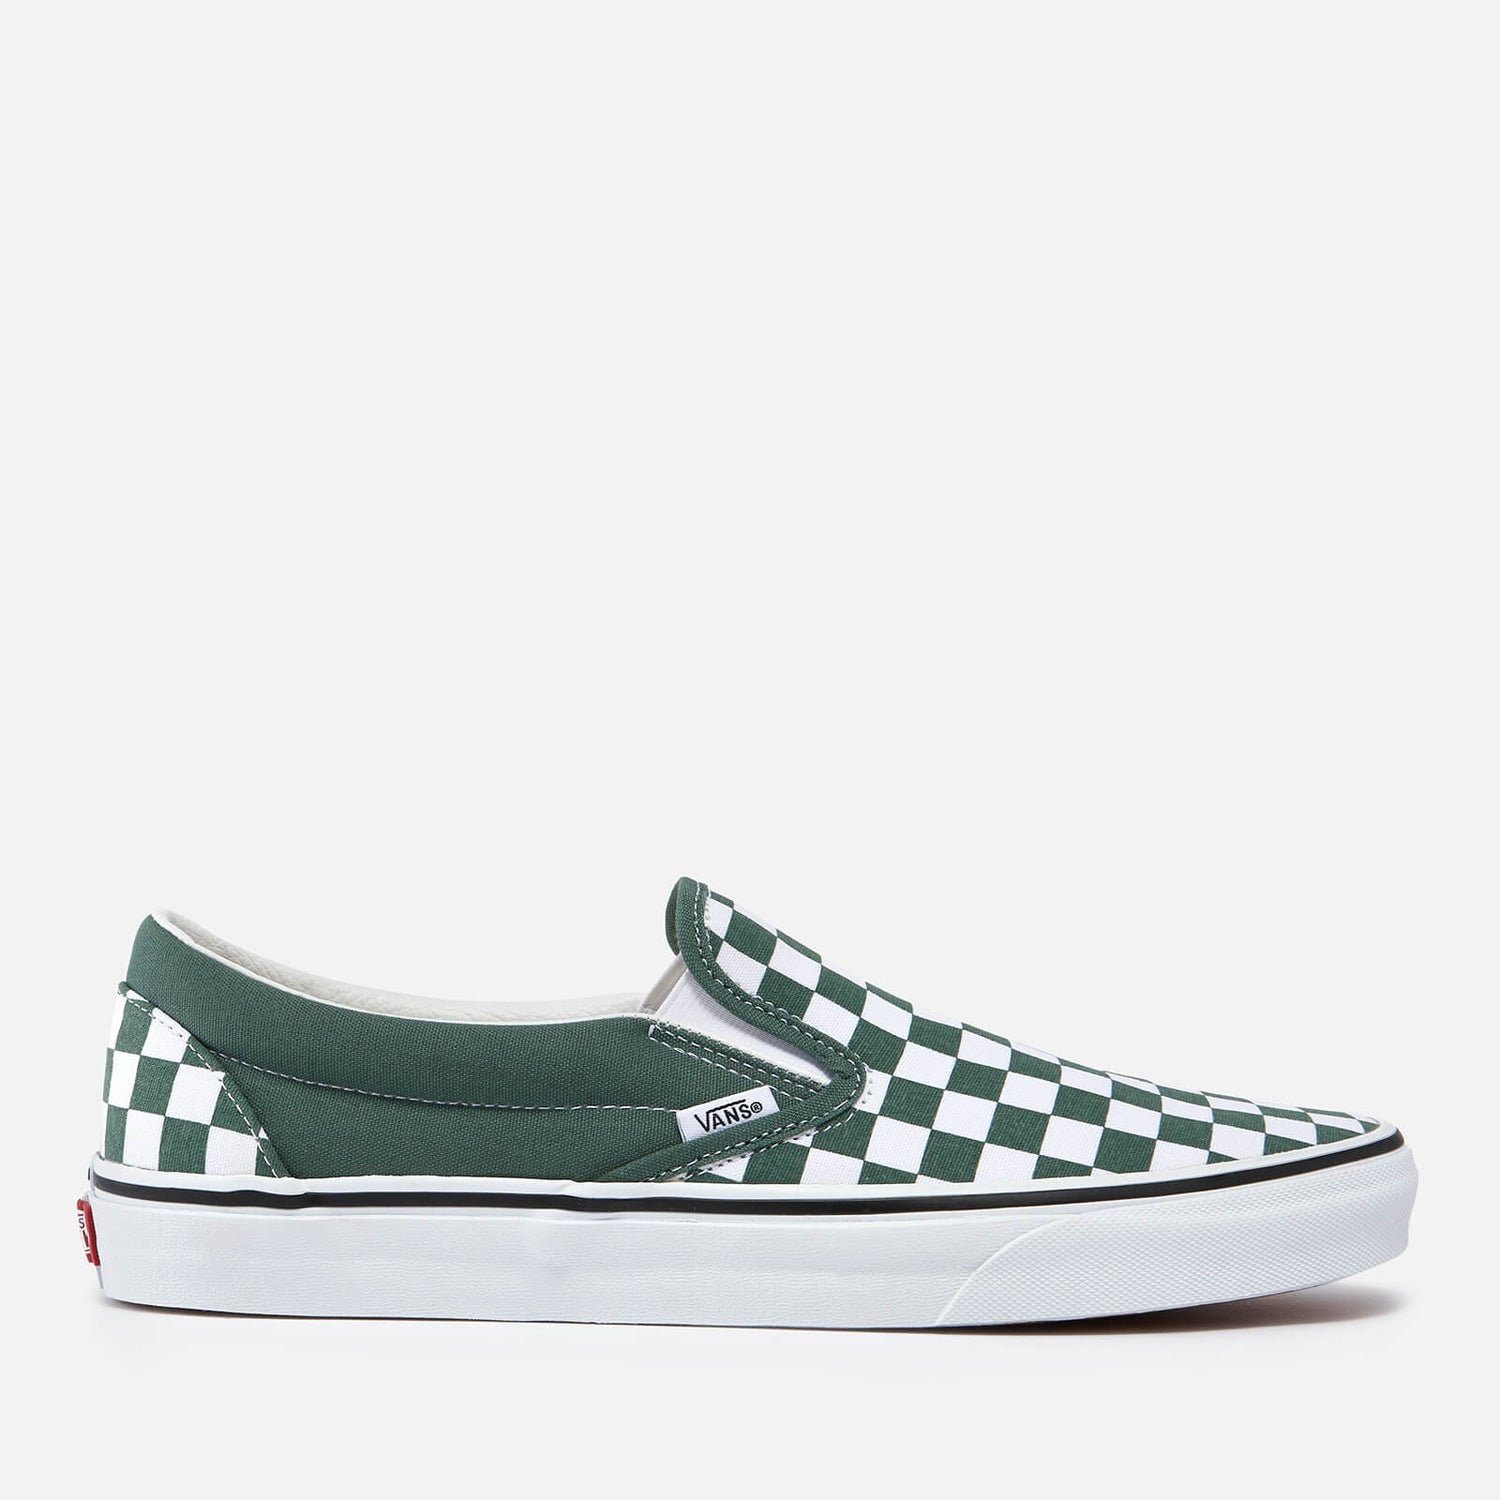 Vans Classic Checkerboard Canvas Slip-On Trainers